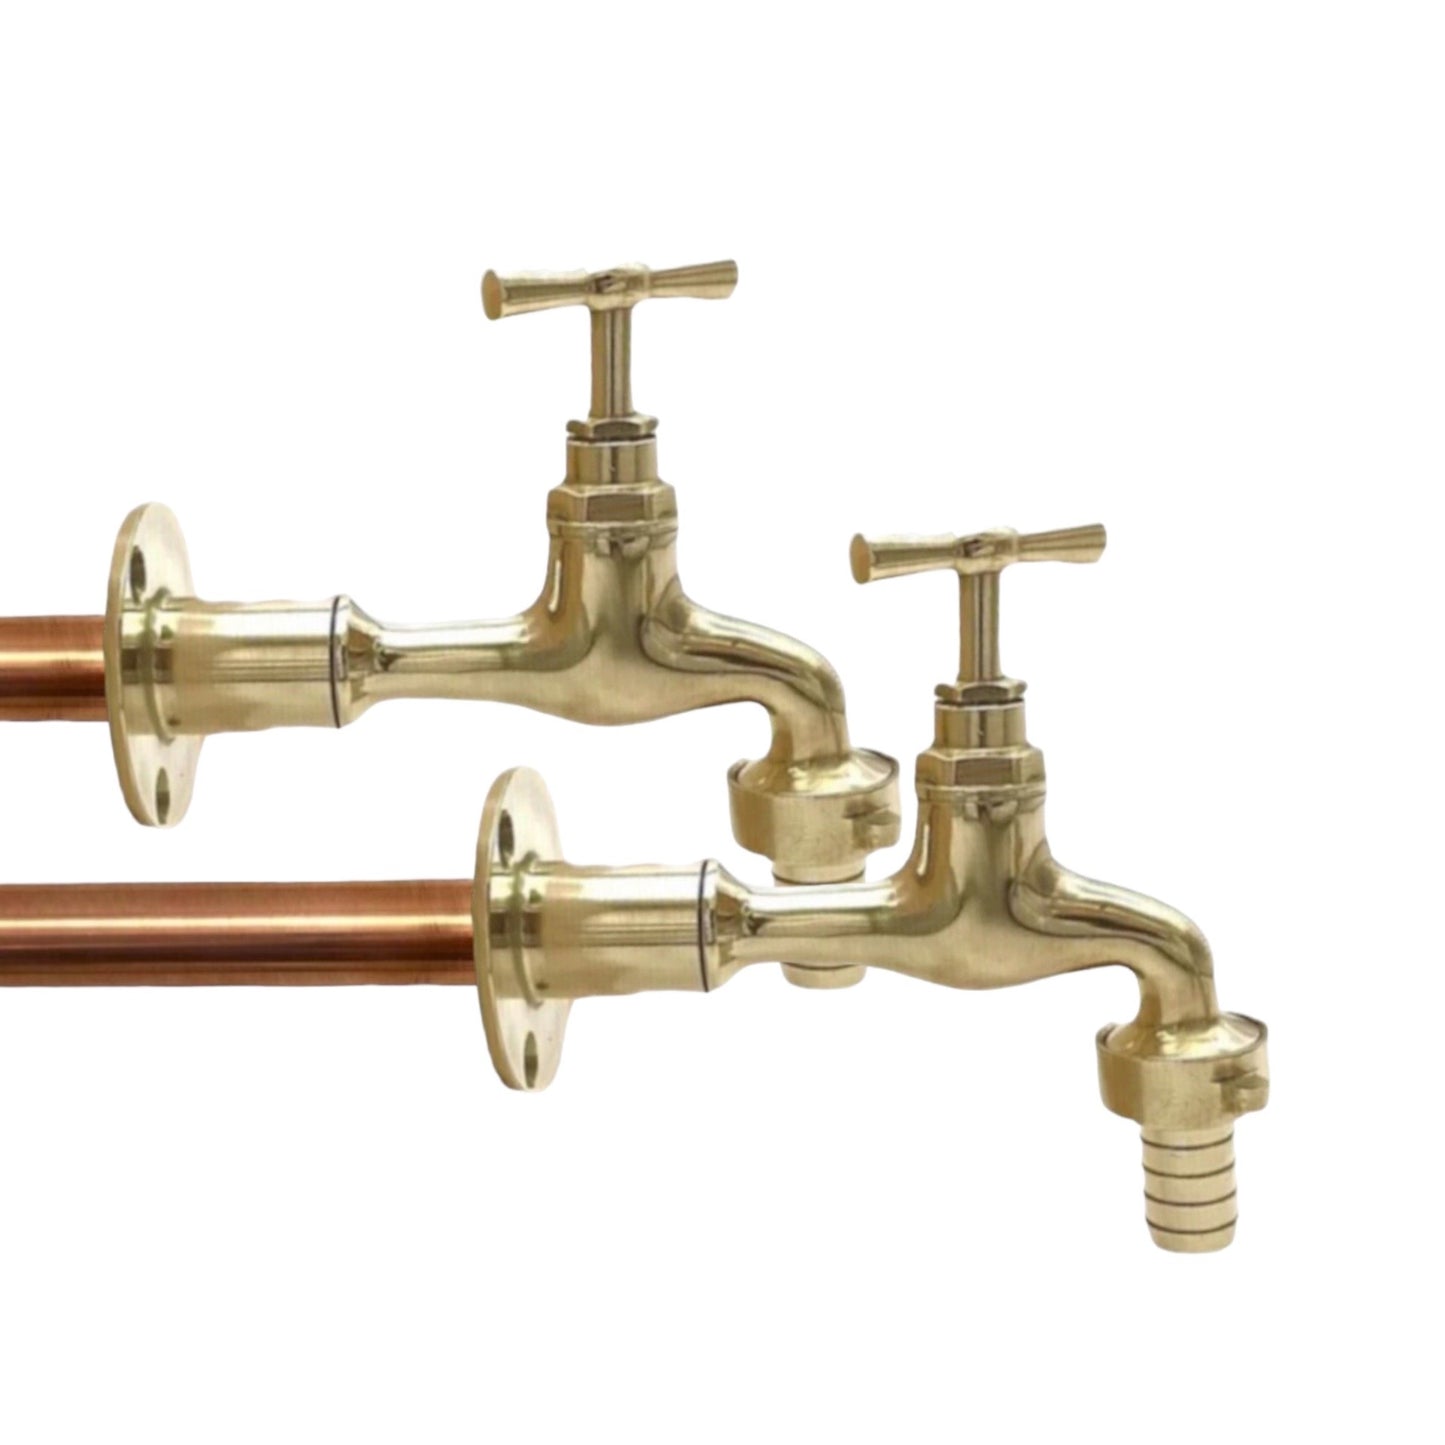 Pair of brass wall mounted taps with 15mm tail ends sold by All Things French Store